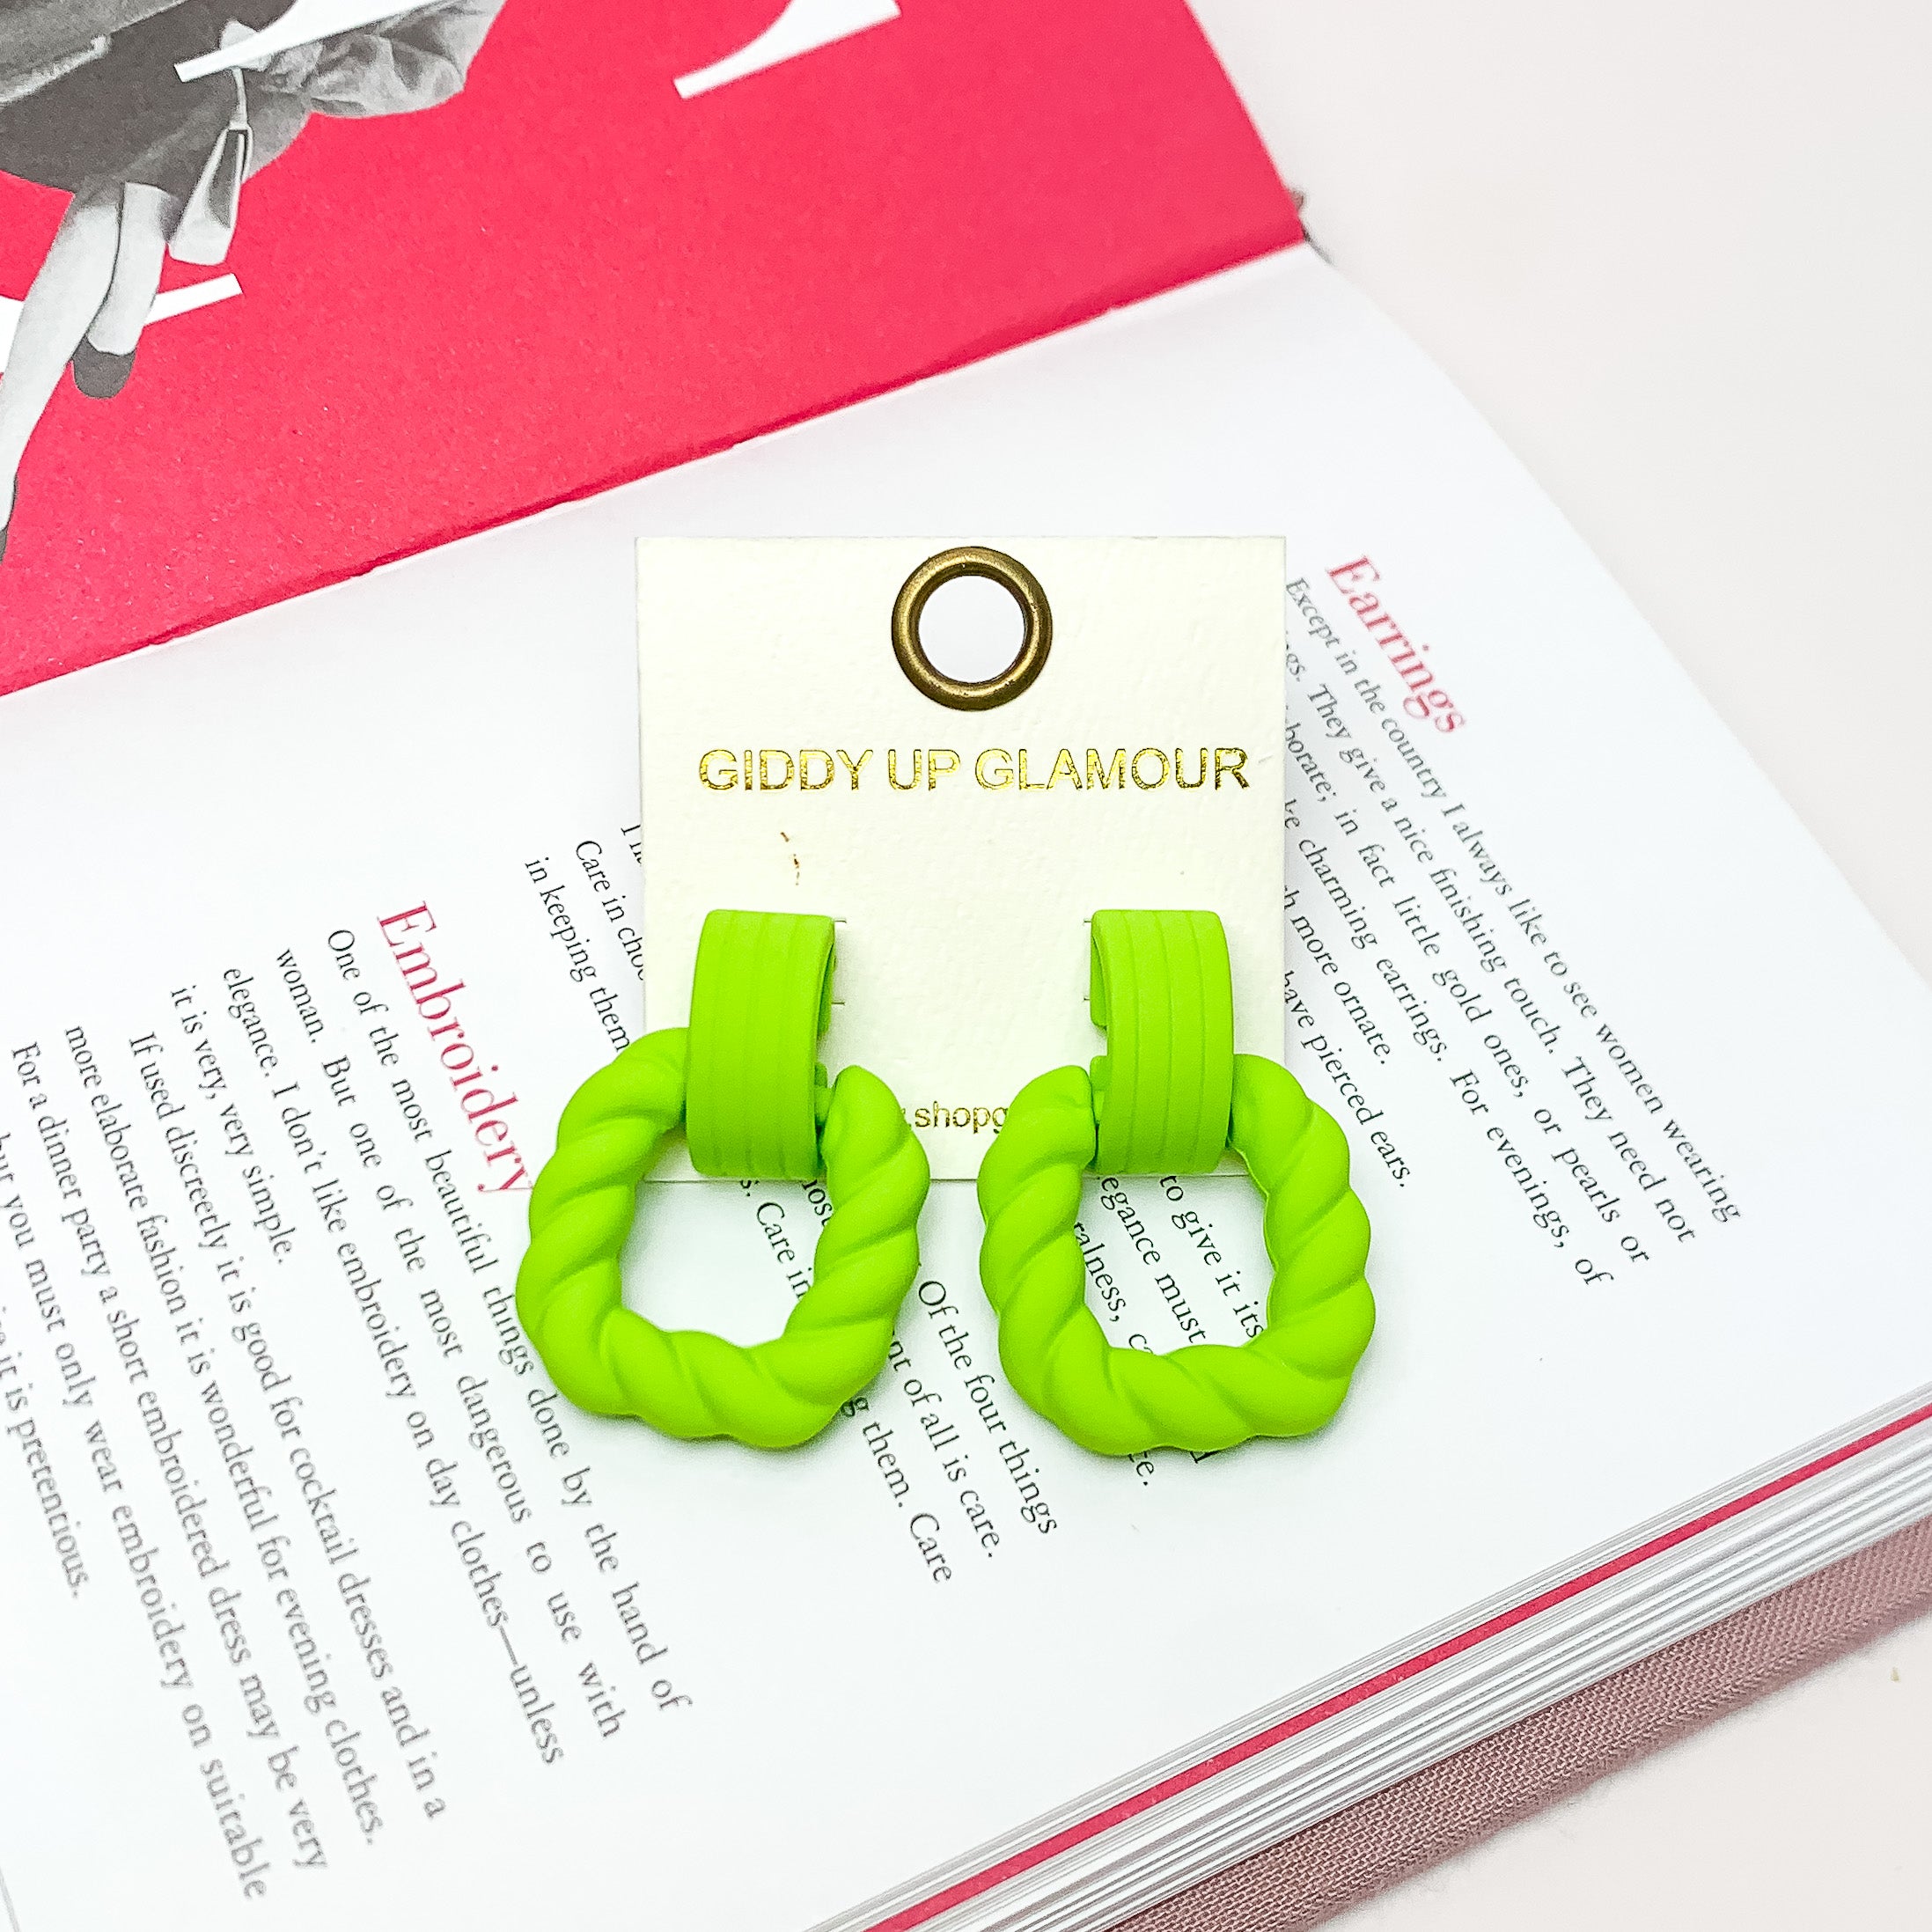 Ready to Party Twisted Square Earrings in Neon Green. Pictured on an open page of a book.